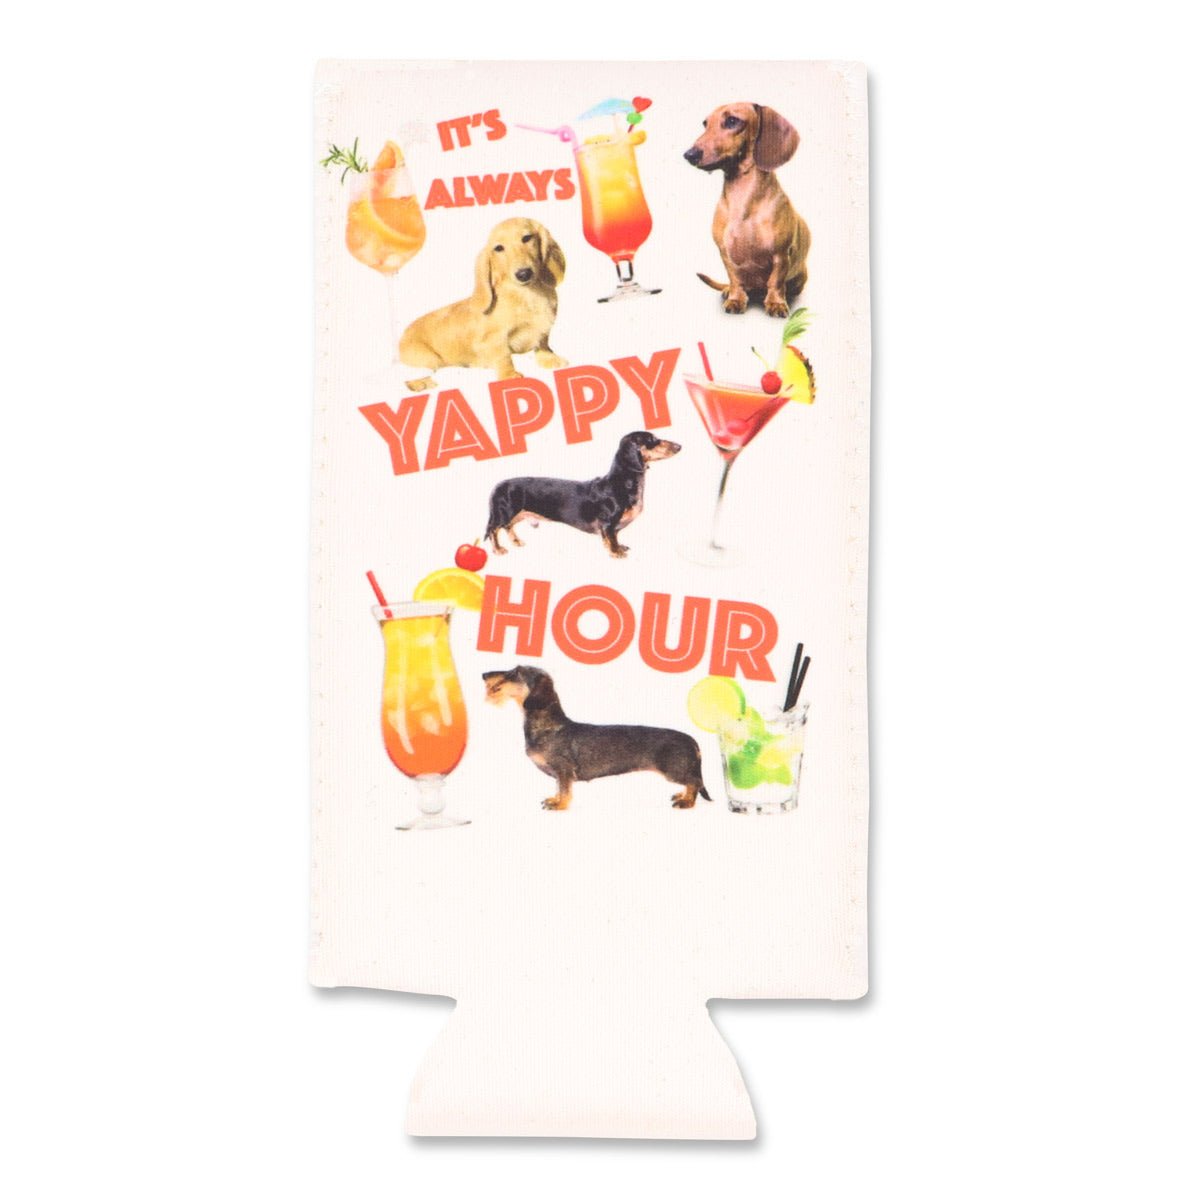 yappy hour can cooler - bean goods